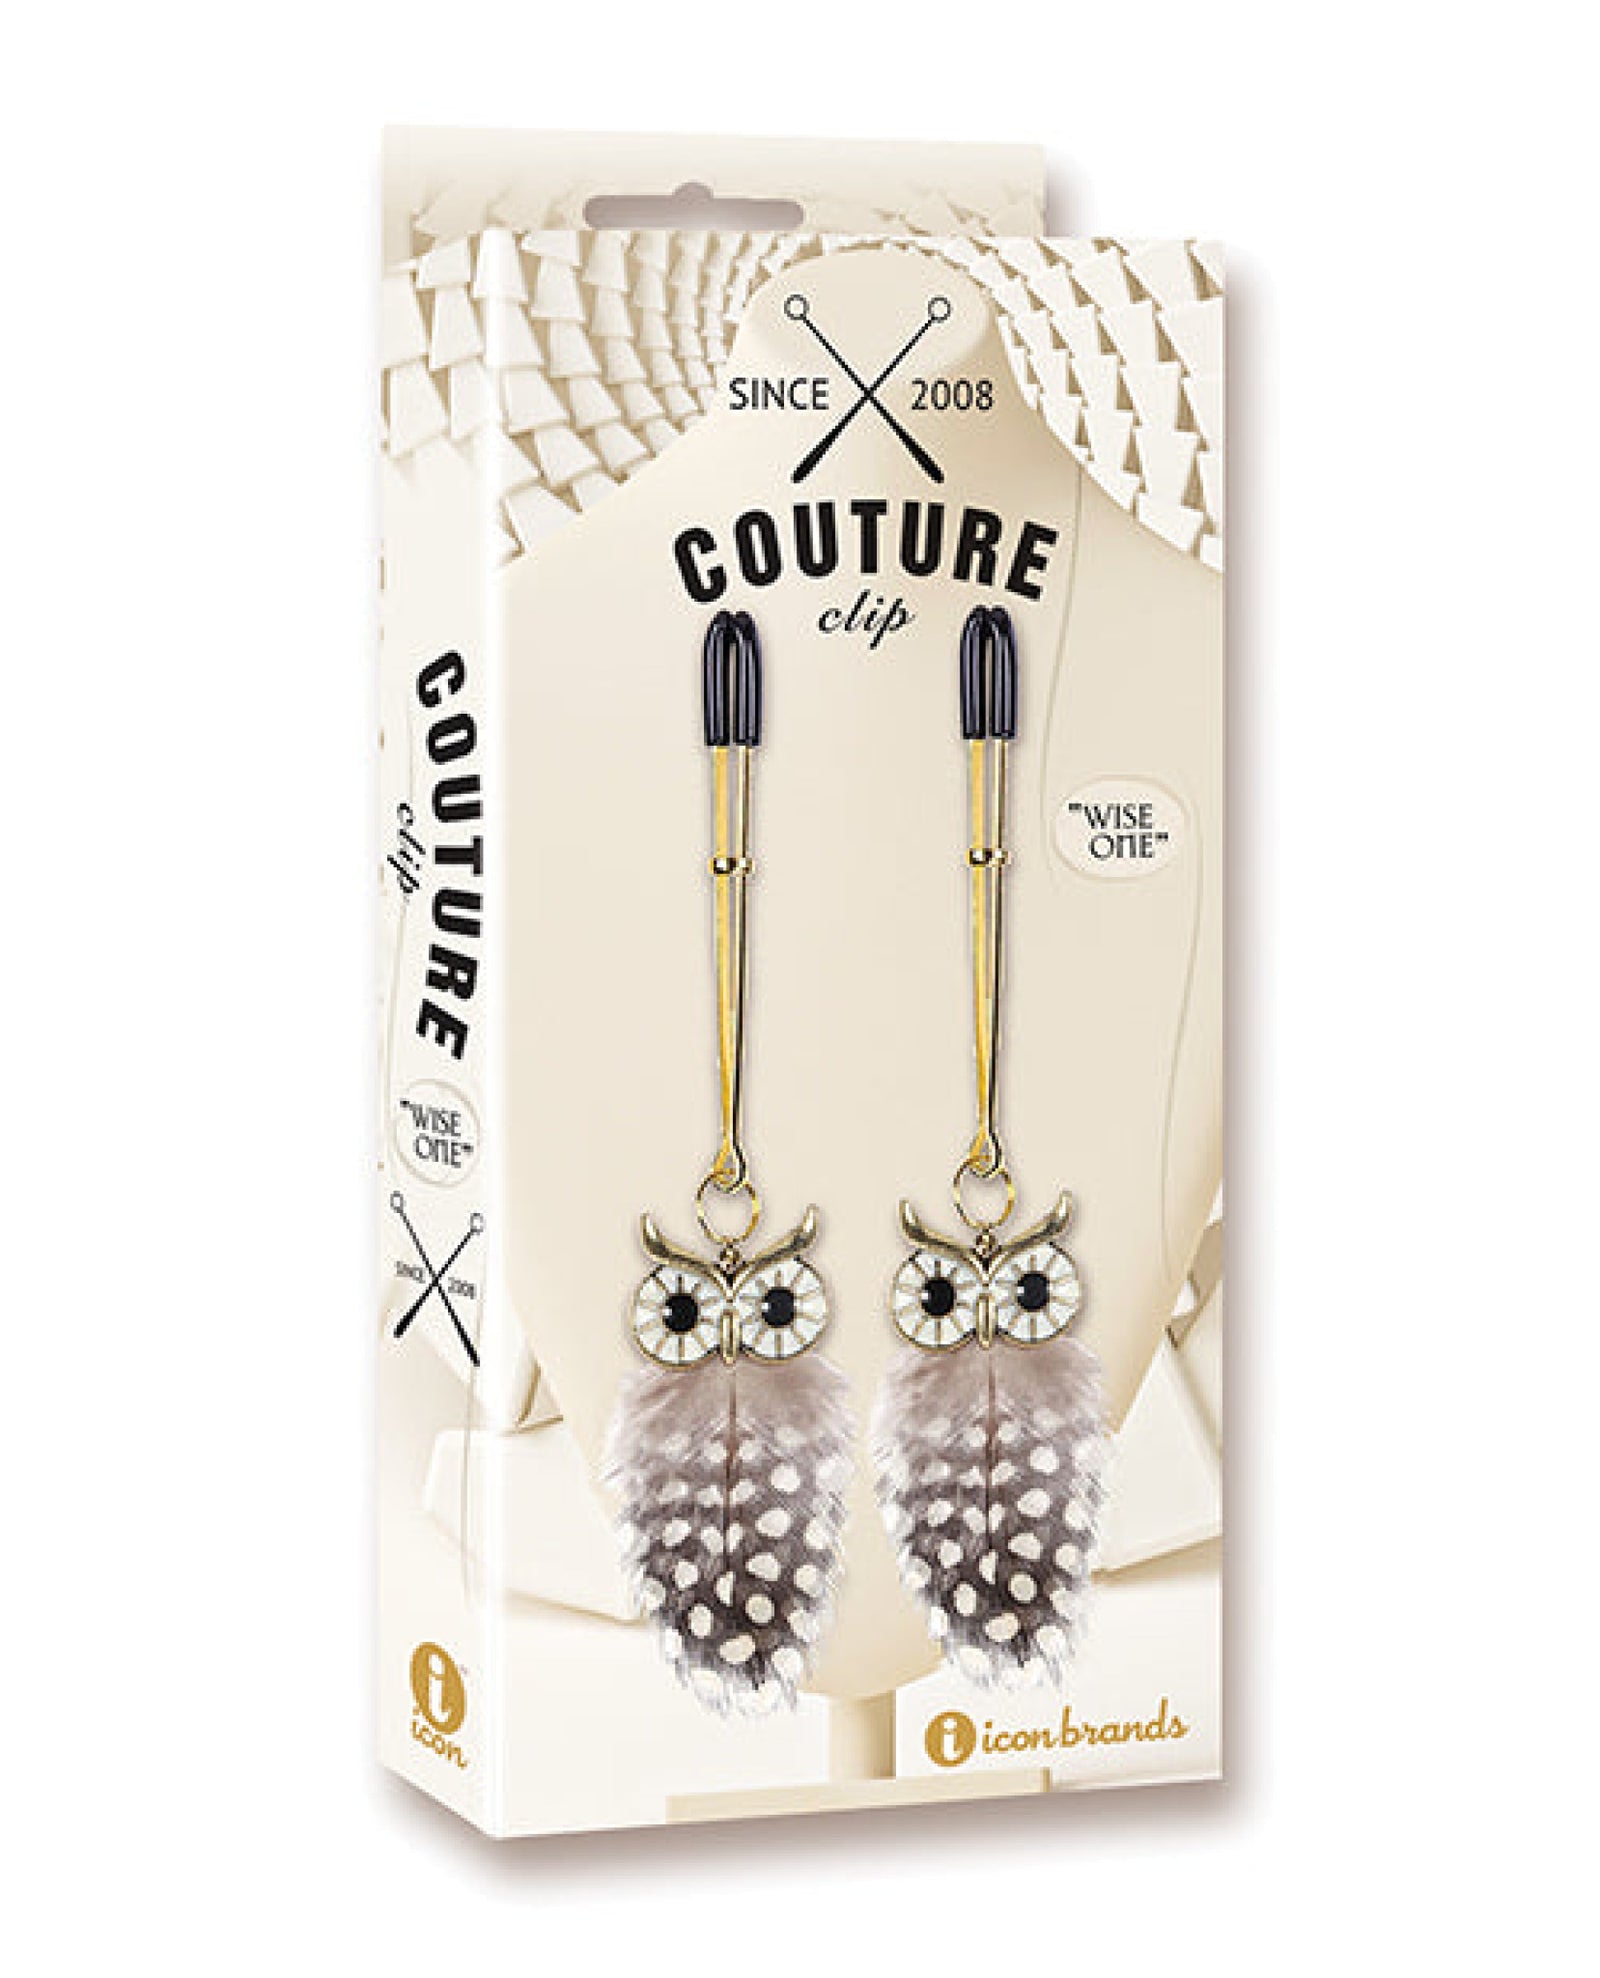 Couture Clips Luxury Nipple Clamps - Wise One Icon